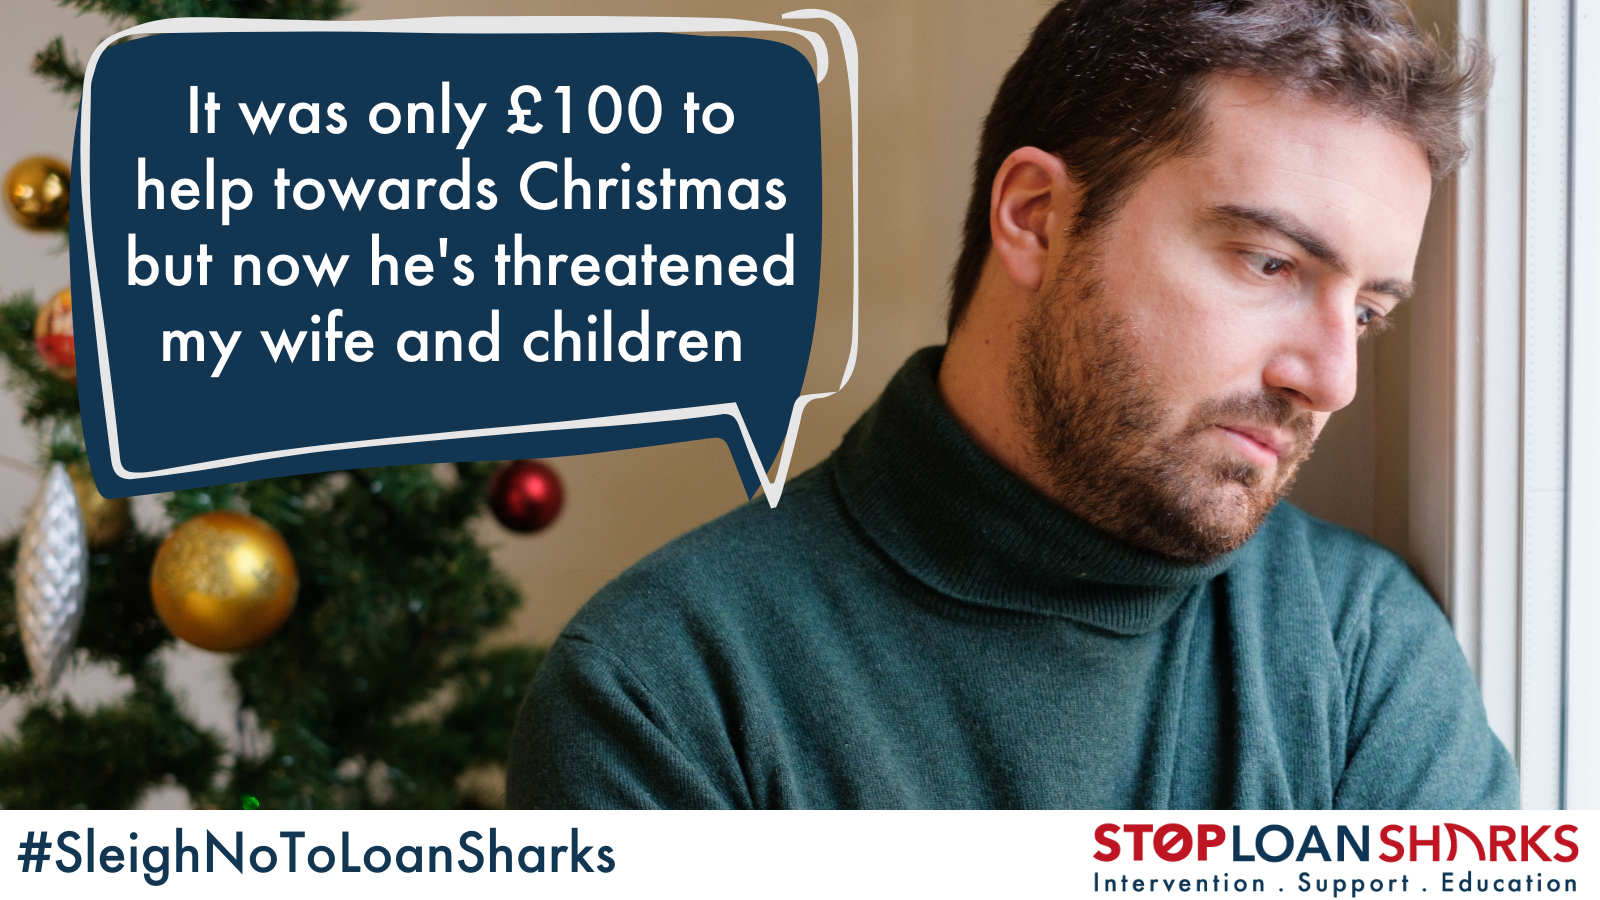 Man looks out of a window whilst feeling sad, next to a speech bubble that says "It was only £100 to help towards Christmas, now he's threatened my wife and children".